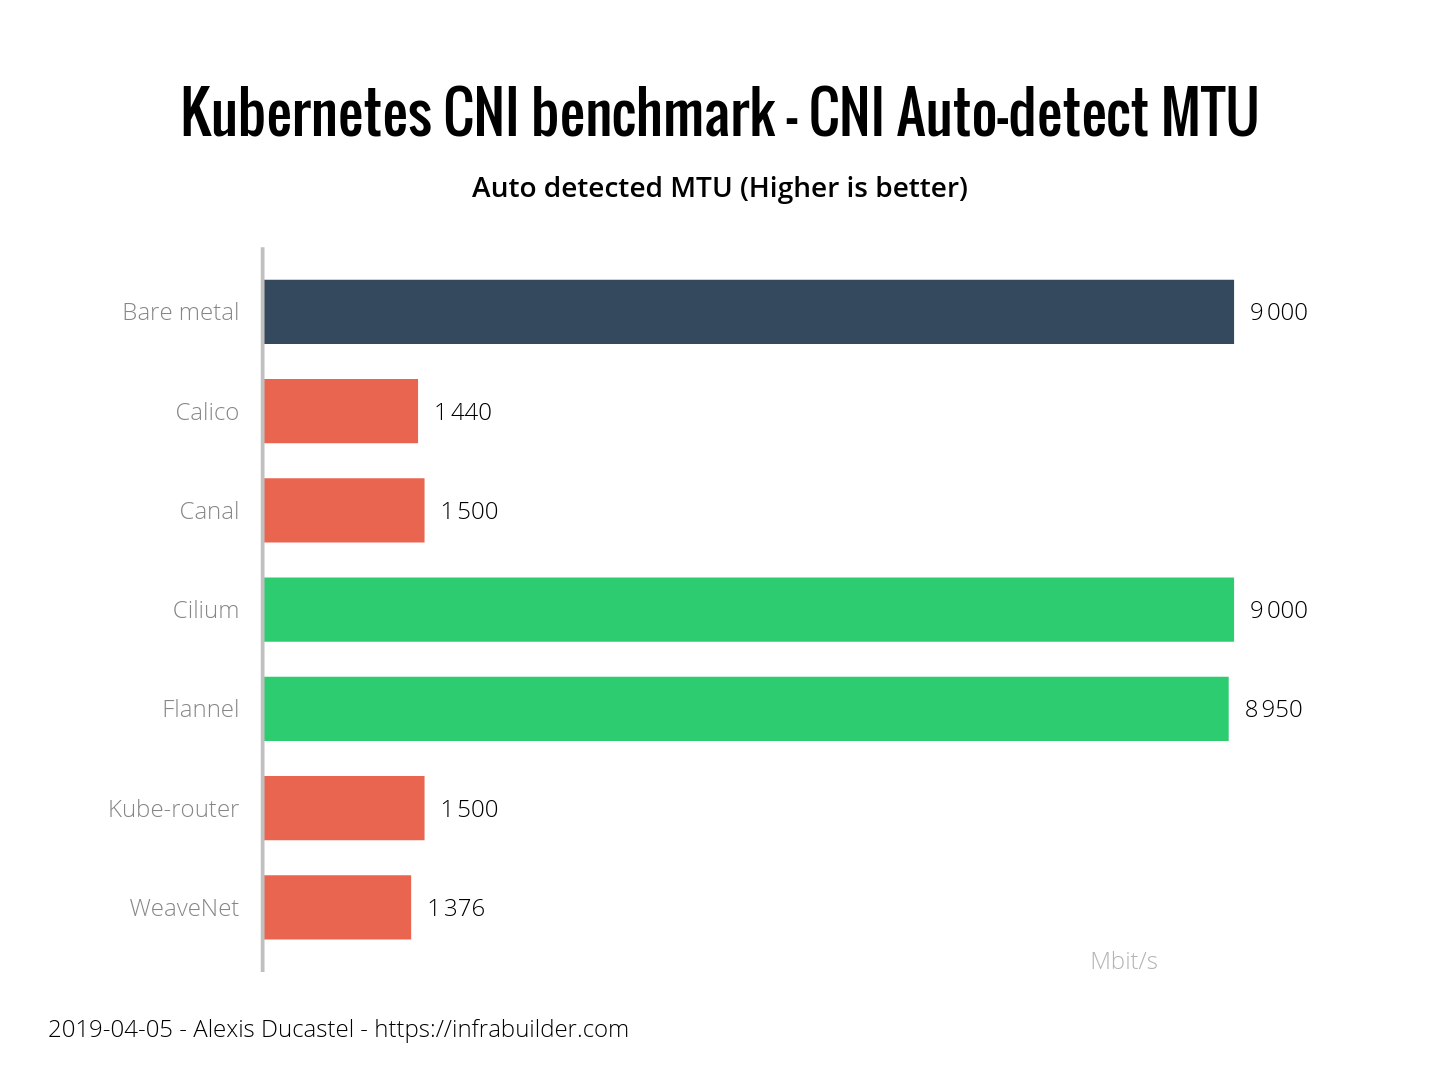 MTU auto-detected by CNIs